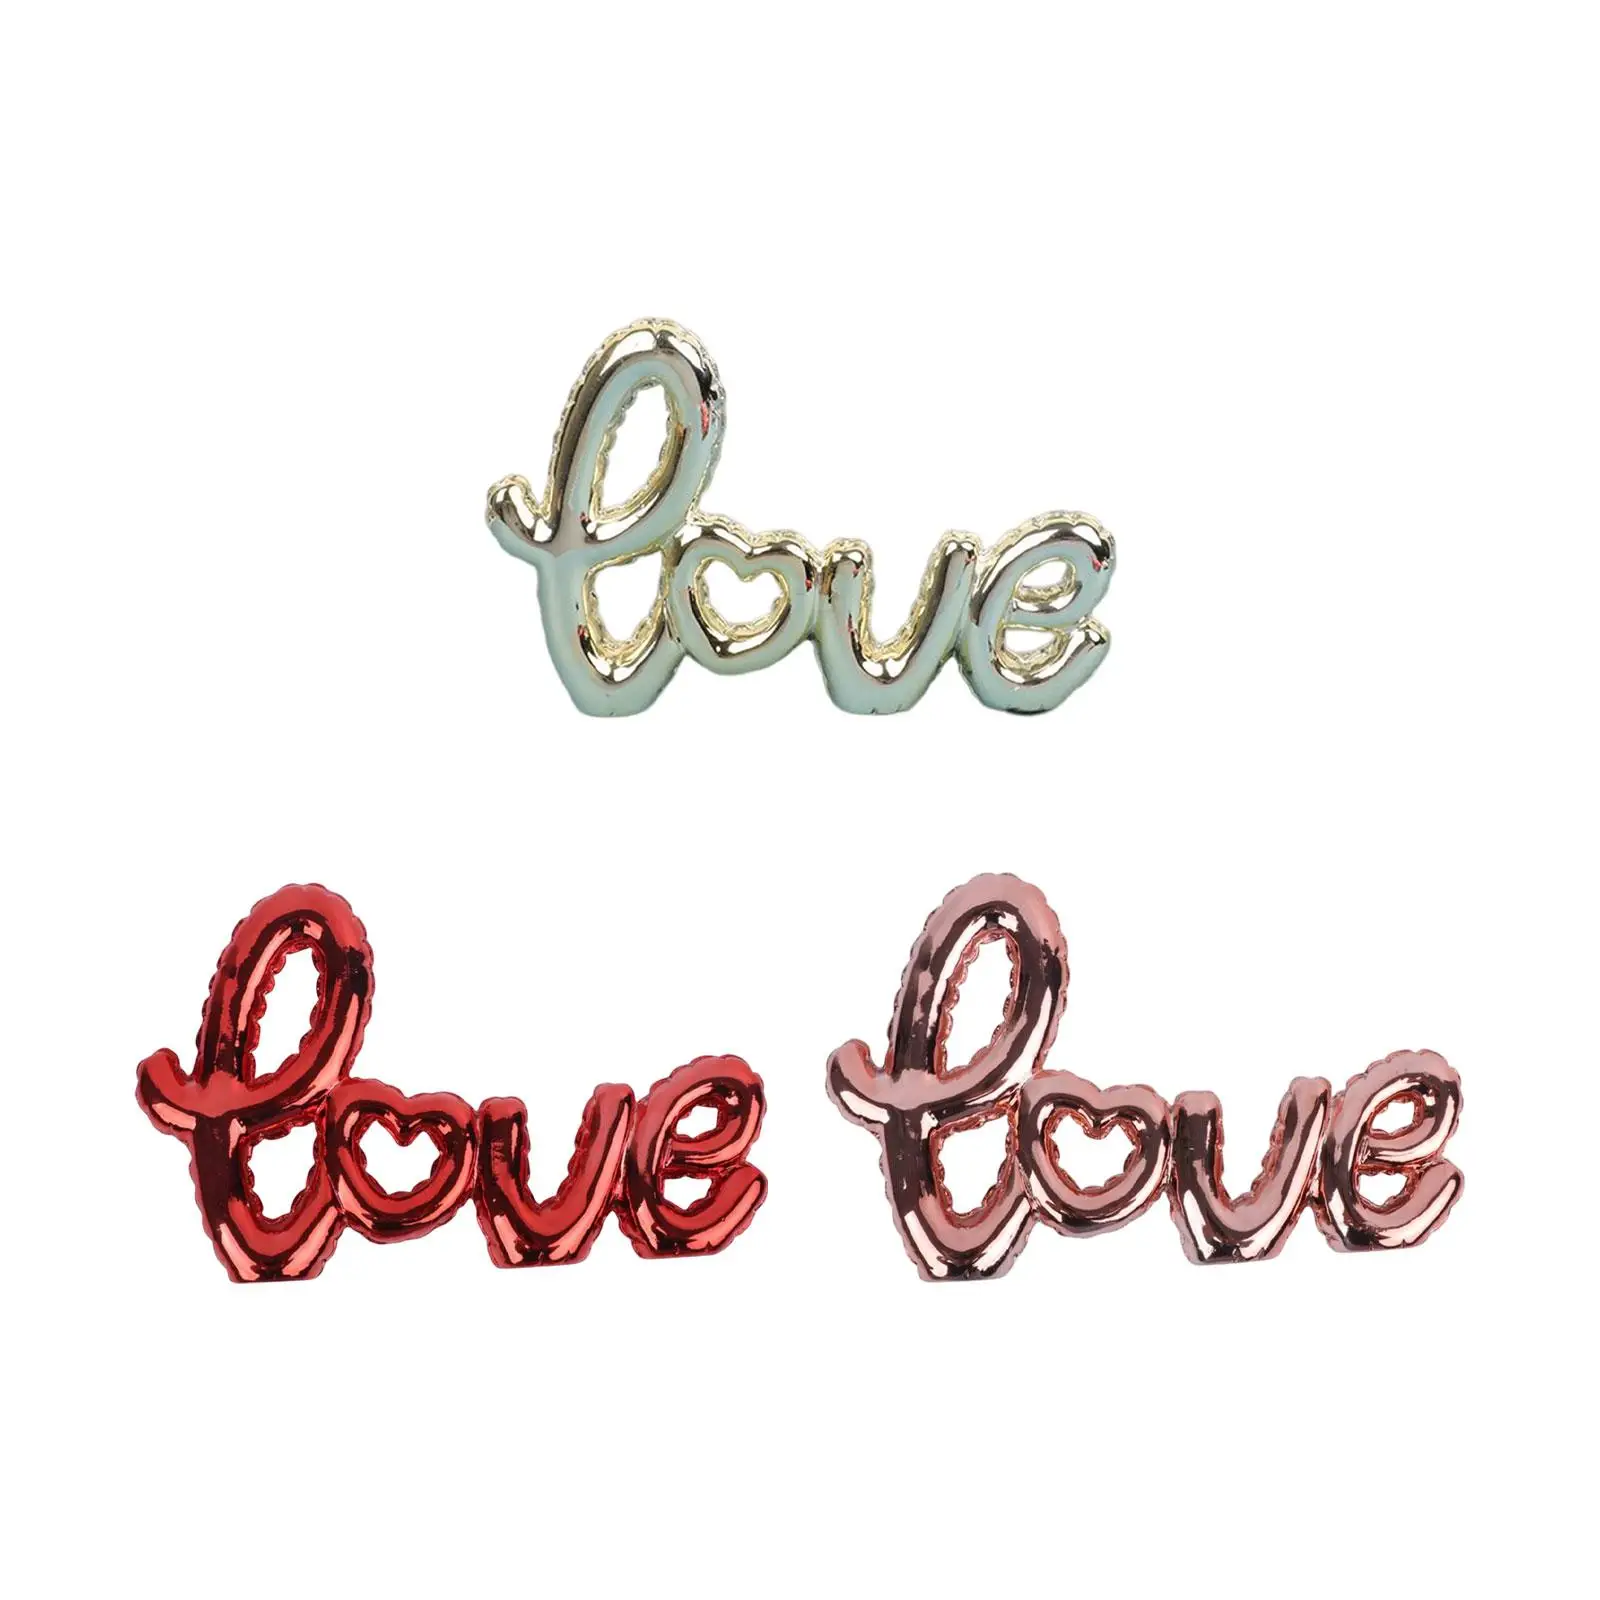 Love Sign Decoration Love Ornament Modern Art Letter Sculpture for Coffee Table Farmhouse Anniversary Party Decorations